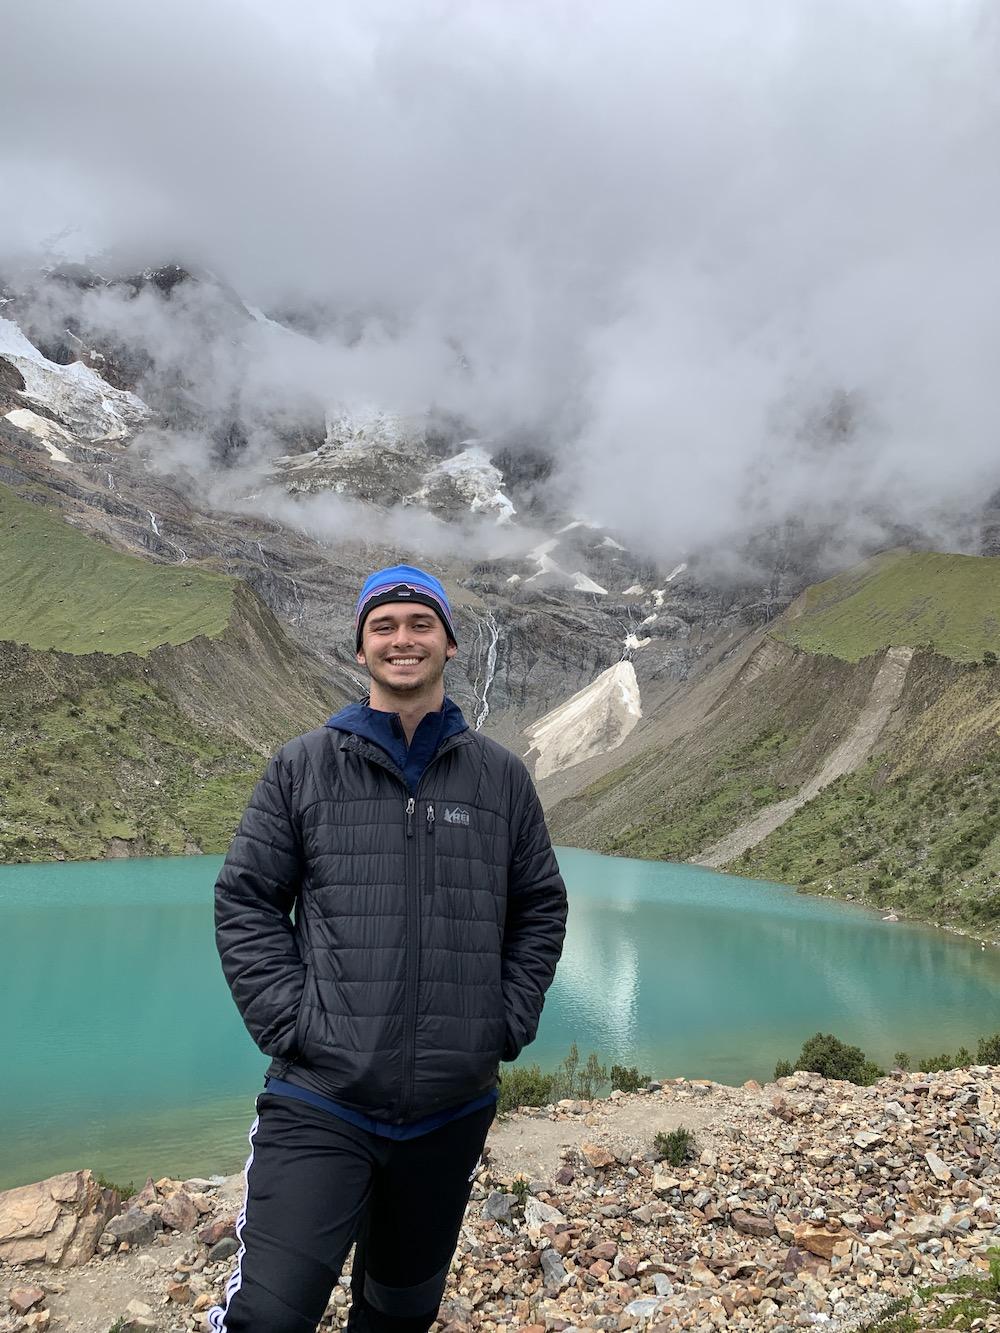 Ekenstam smiles during a 45-mile backpacking trip in Laguna Humantay, Peru, in December 2019. He said he's loved hiking since he was a child. Photo courtesy of Aaron Ekenstam